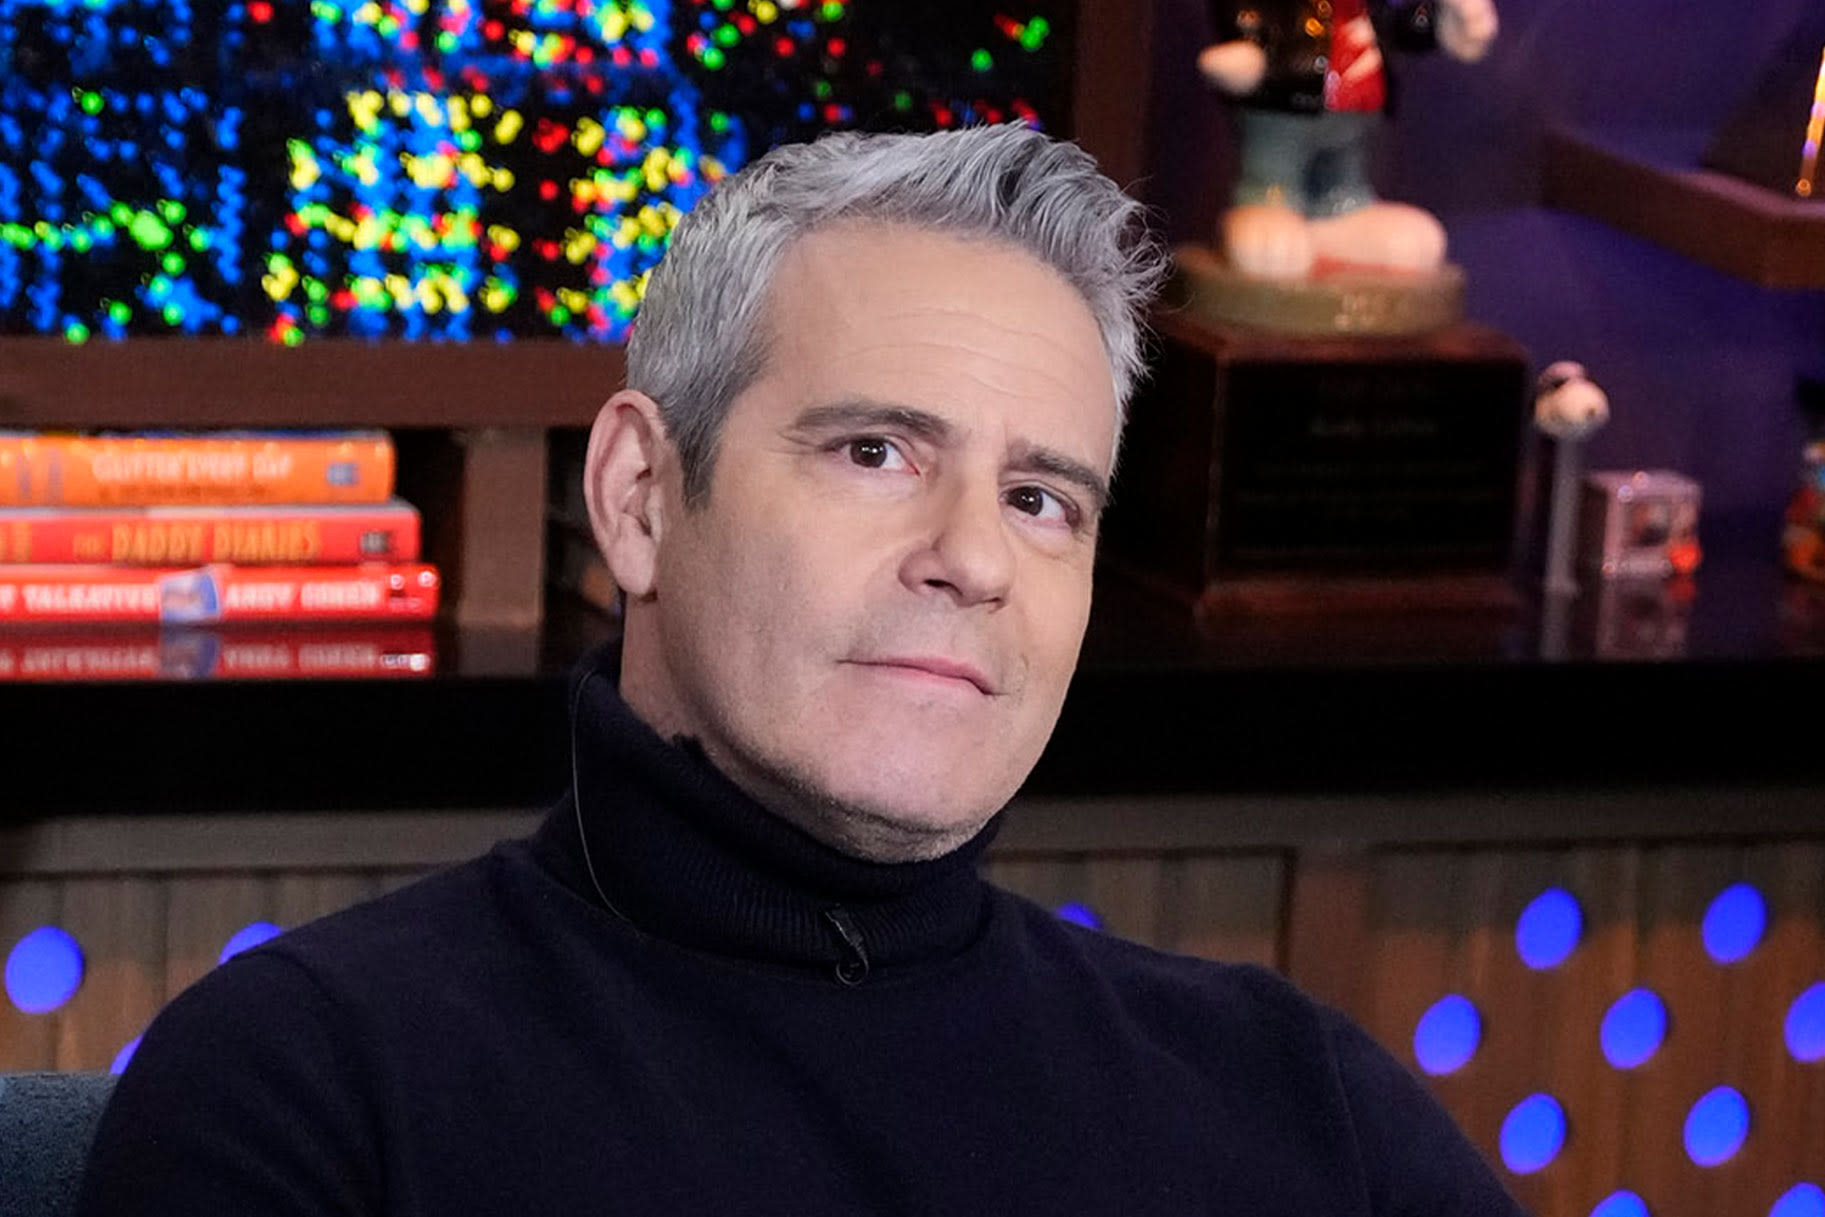 Andy Cohen Explains the Need for Show Pauses: "Let's Put Cameras Down" | Bravo TV Official Site